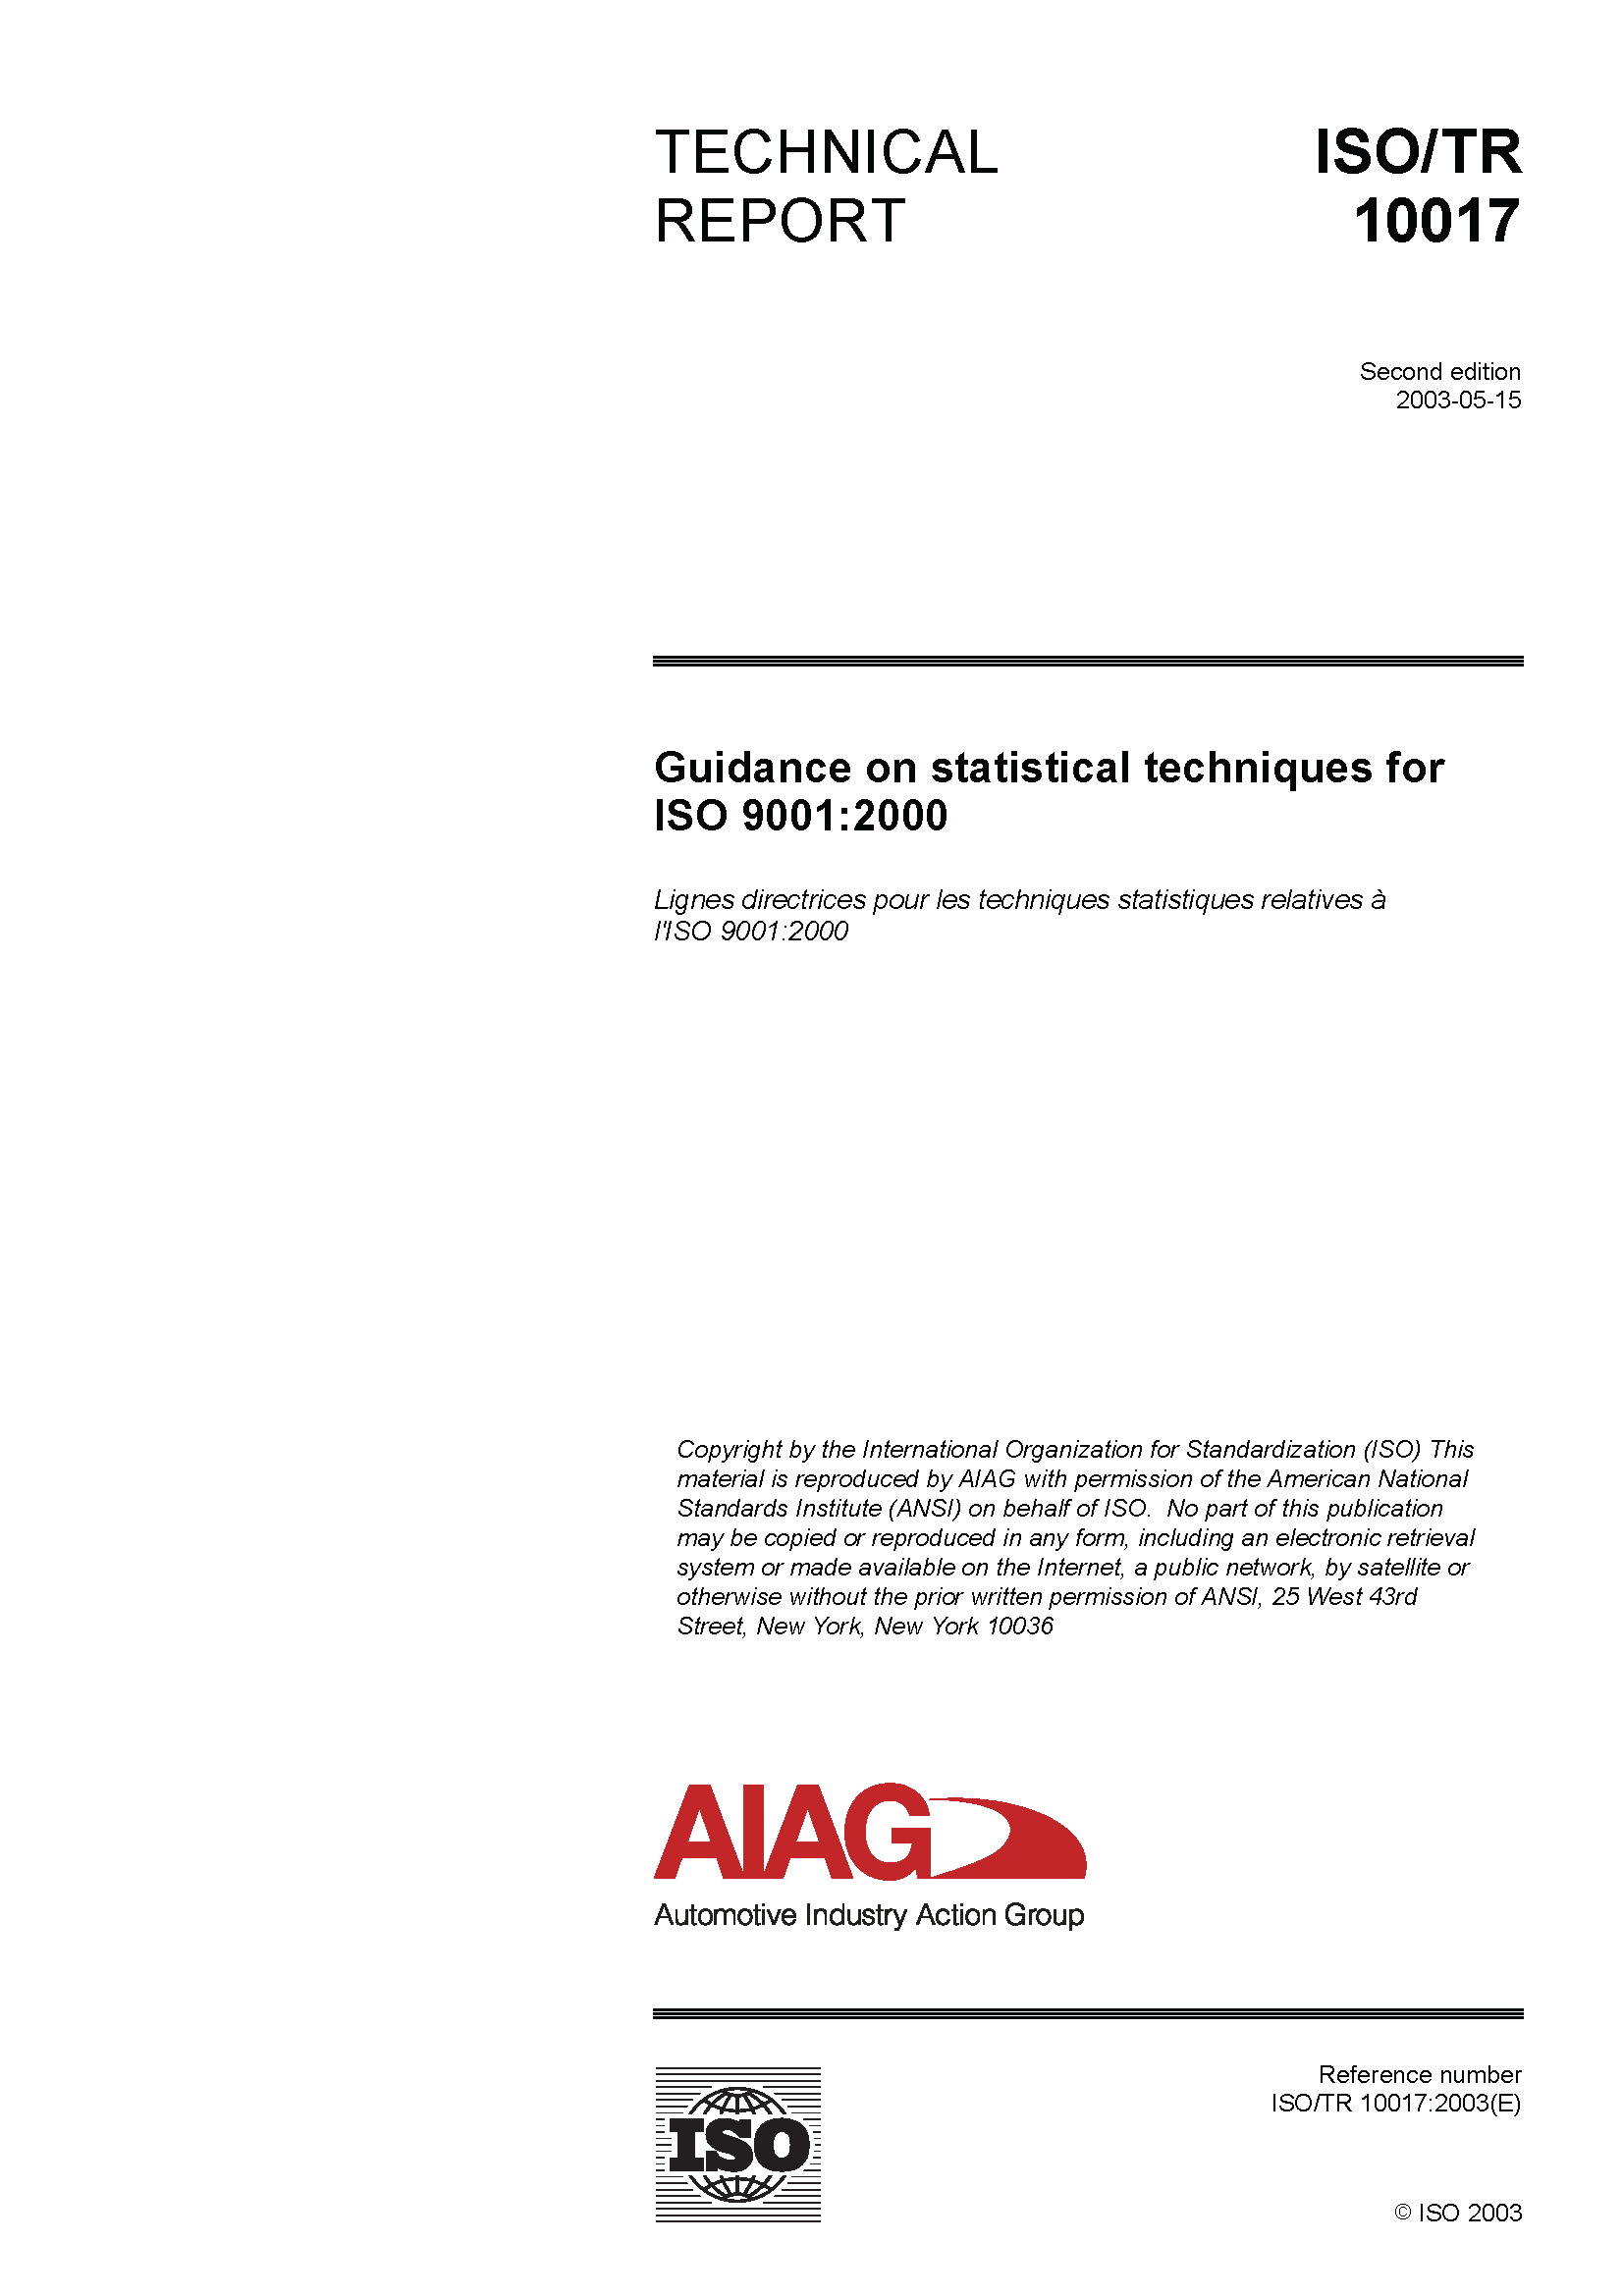 Náhled  Guidance on Statistical Techniques for ISO 9001:2000 1.5.2003